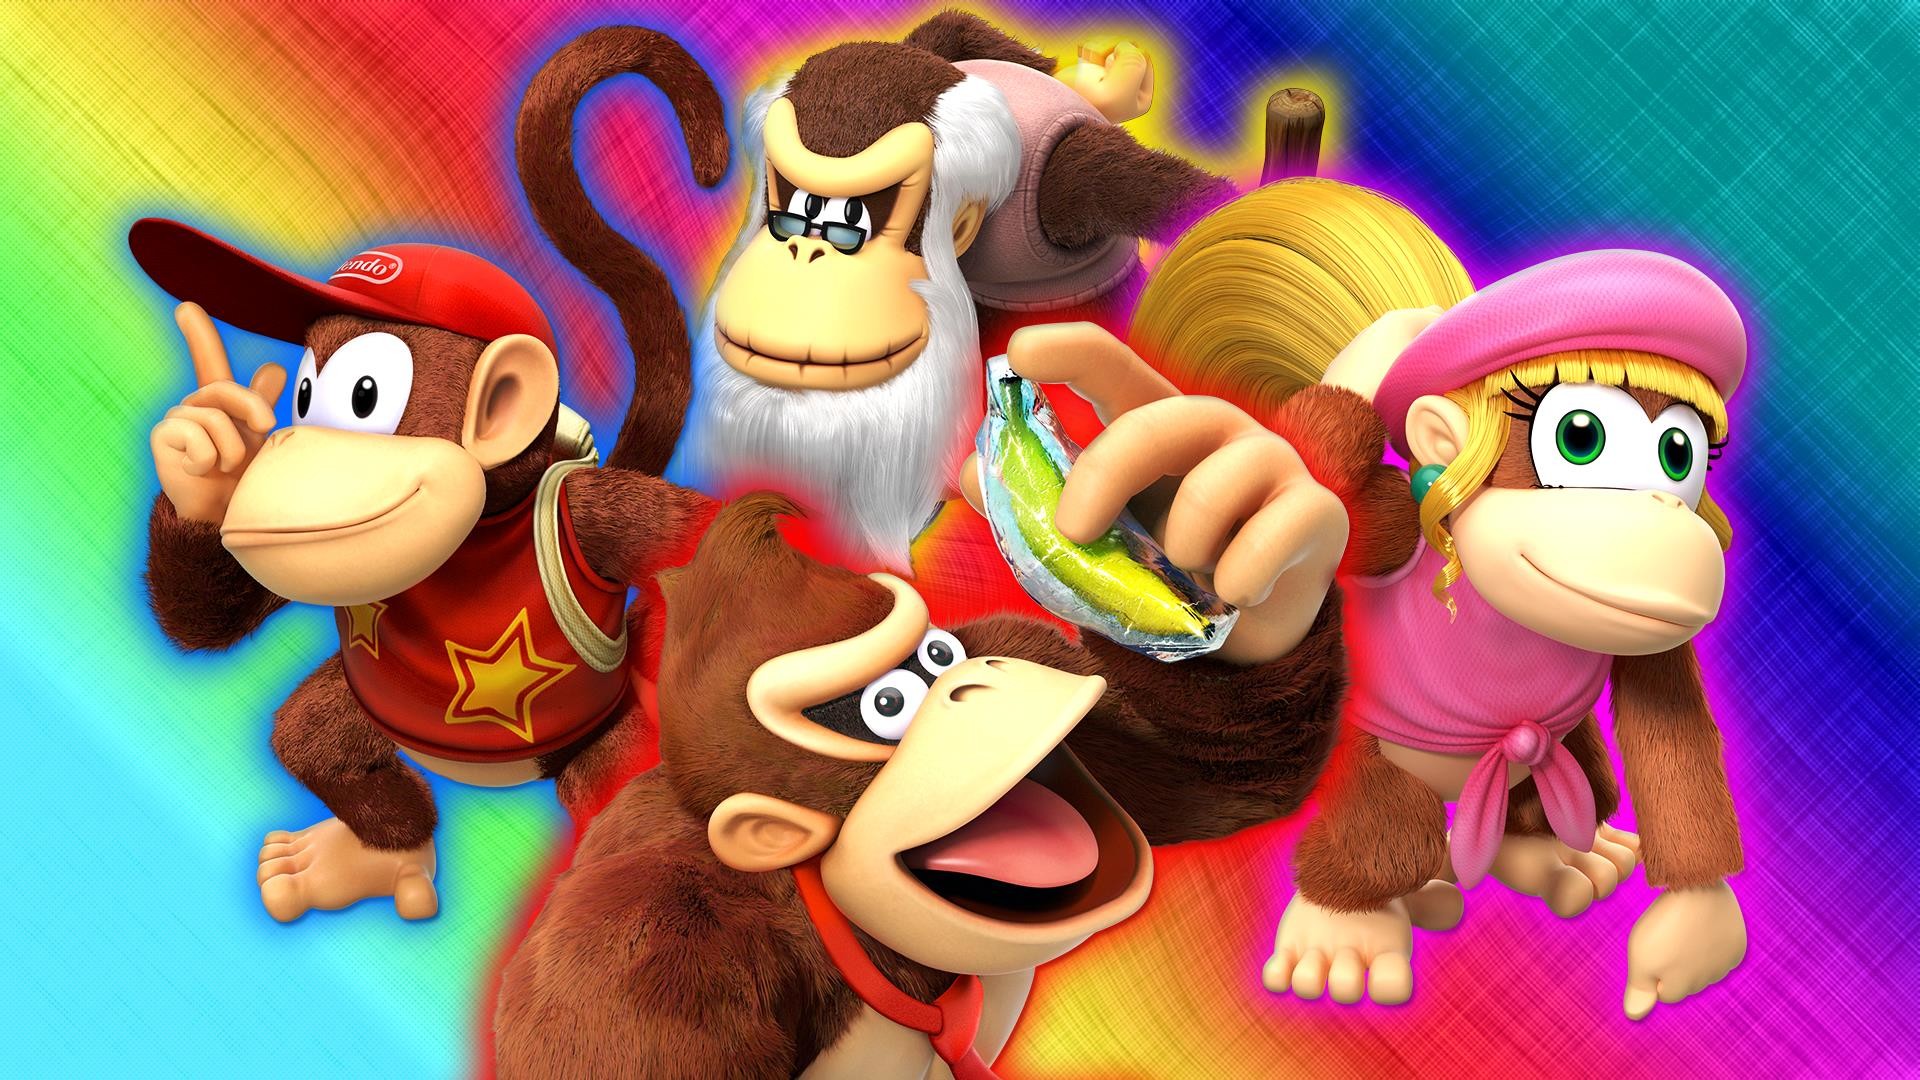 1920x1080 Donkey Kong Wallpapers. by DylzaLSep 22 2015. Load 122 more images Grid view